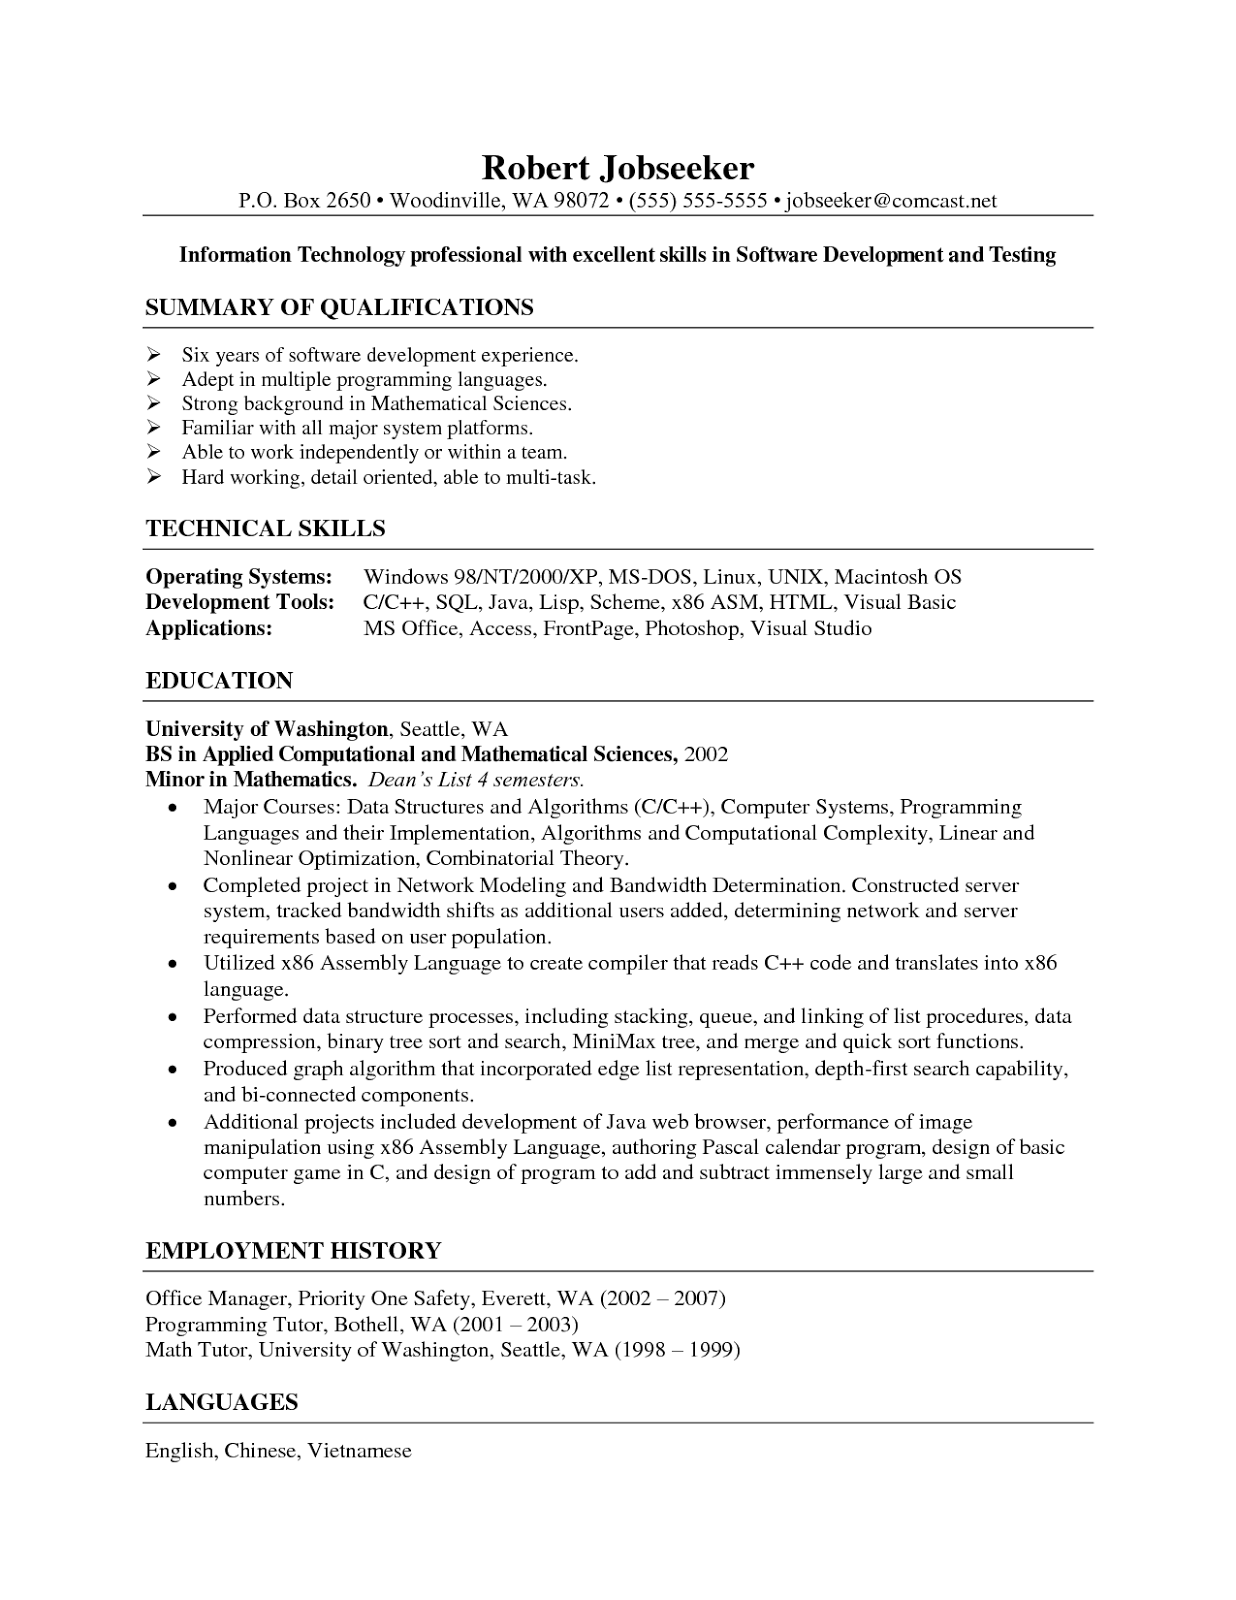 Subject line for emailing resume